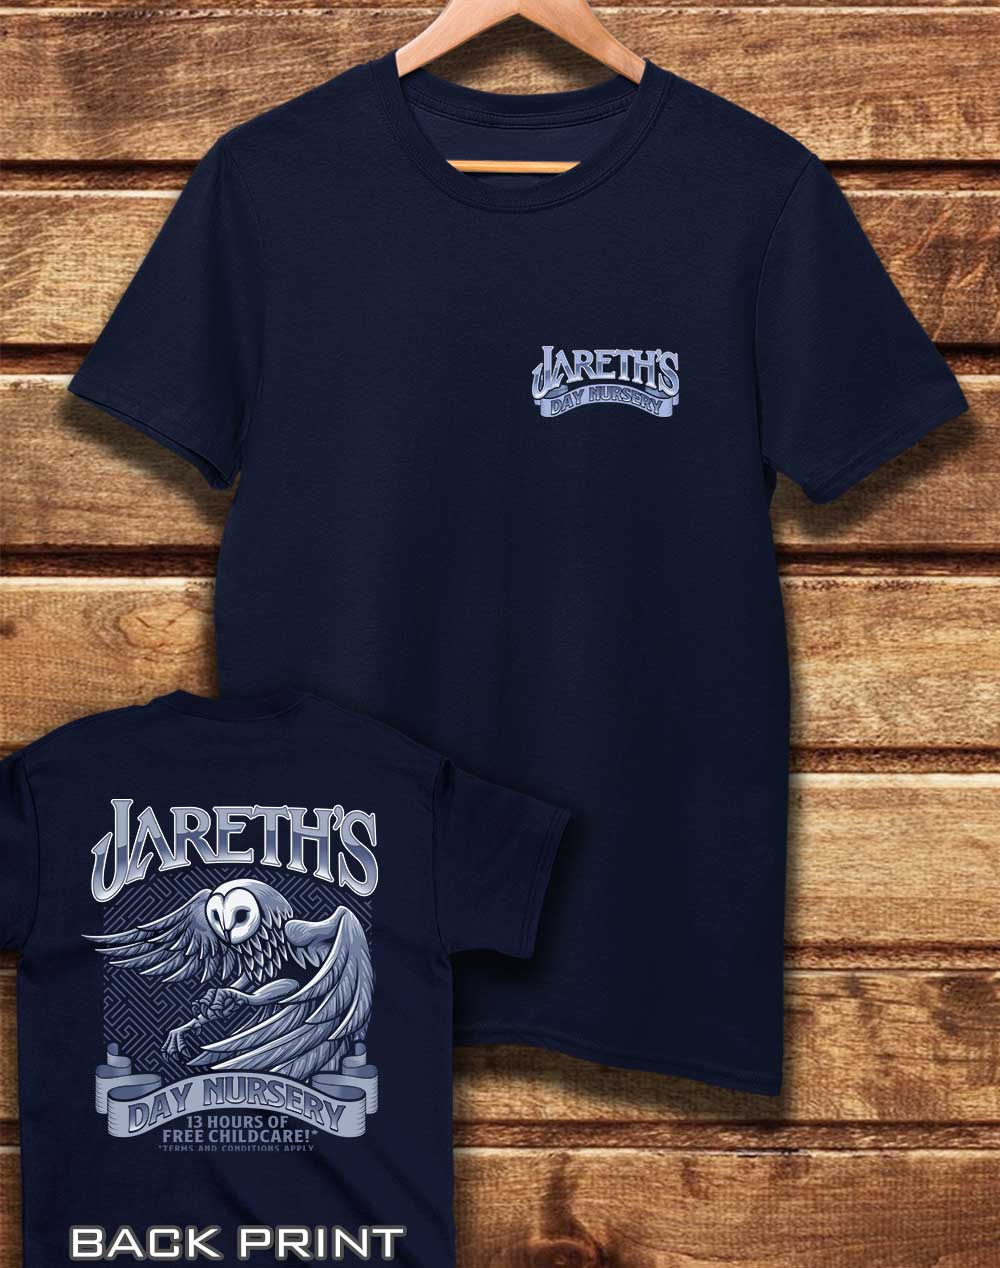 Navy - DELUXE Jareth's Day Nursery with Back Print Organic Cotton T-Shirt